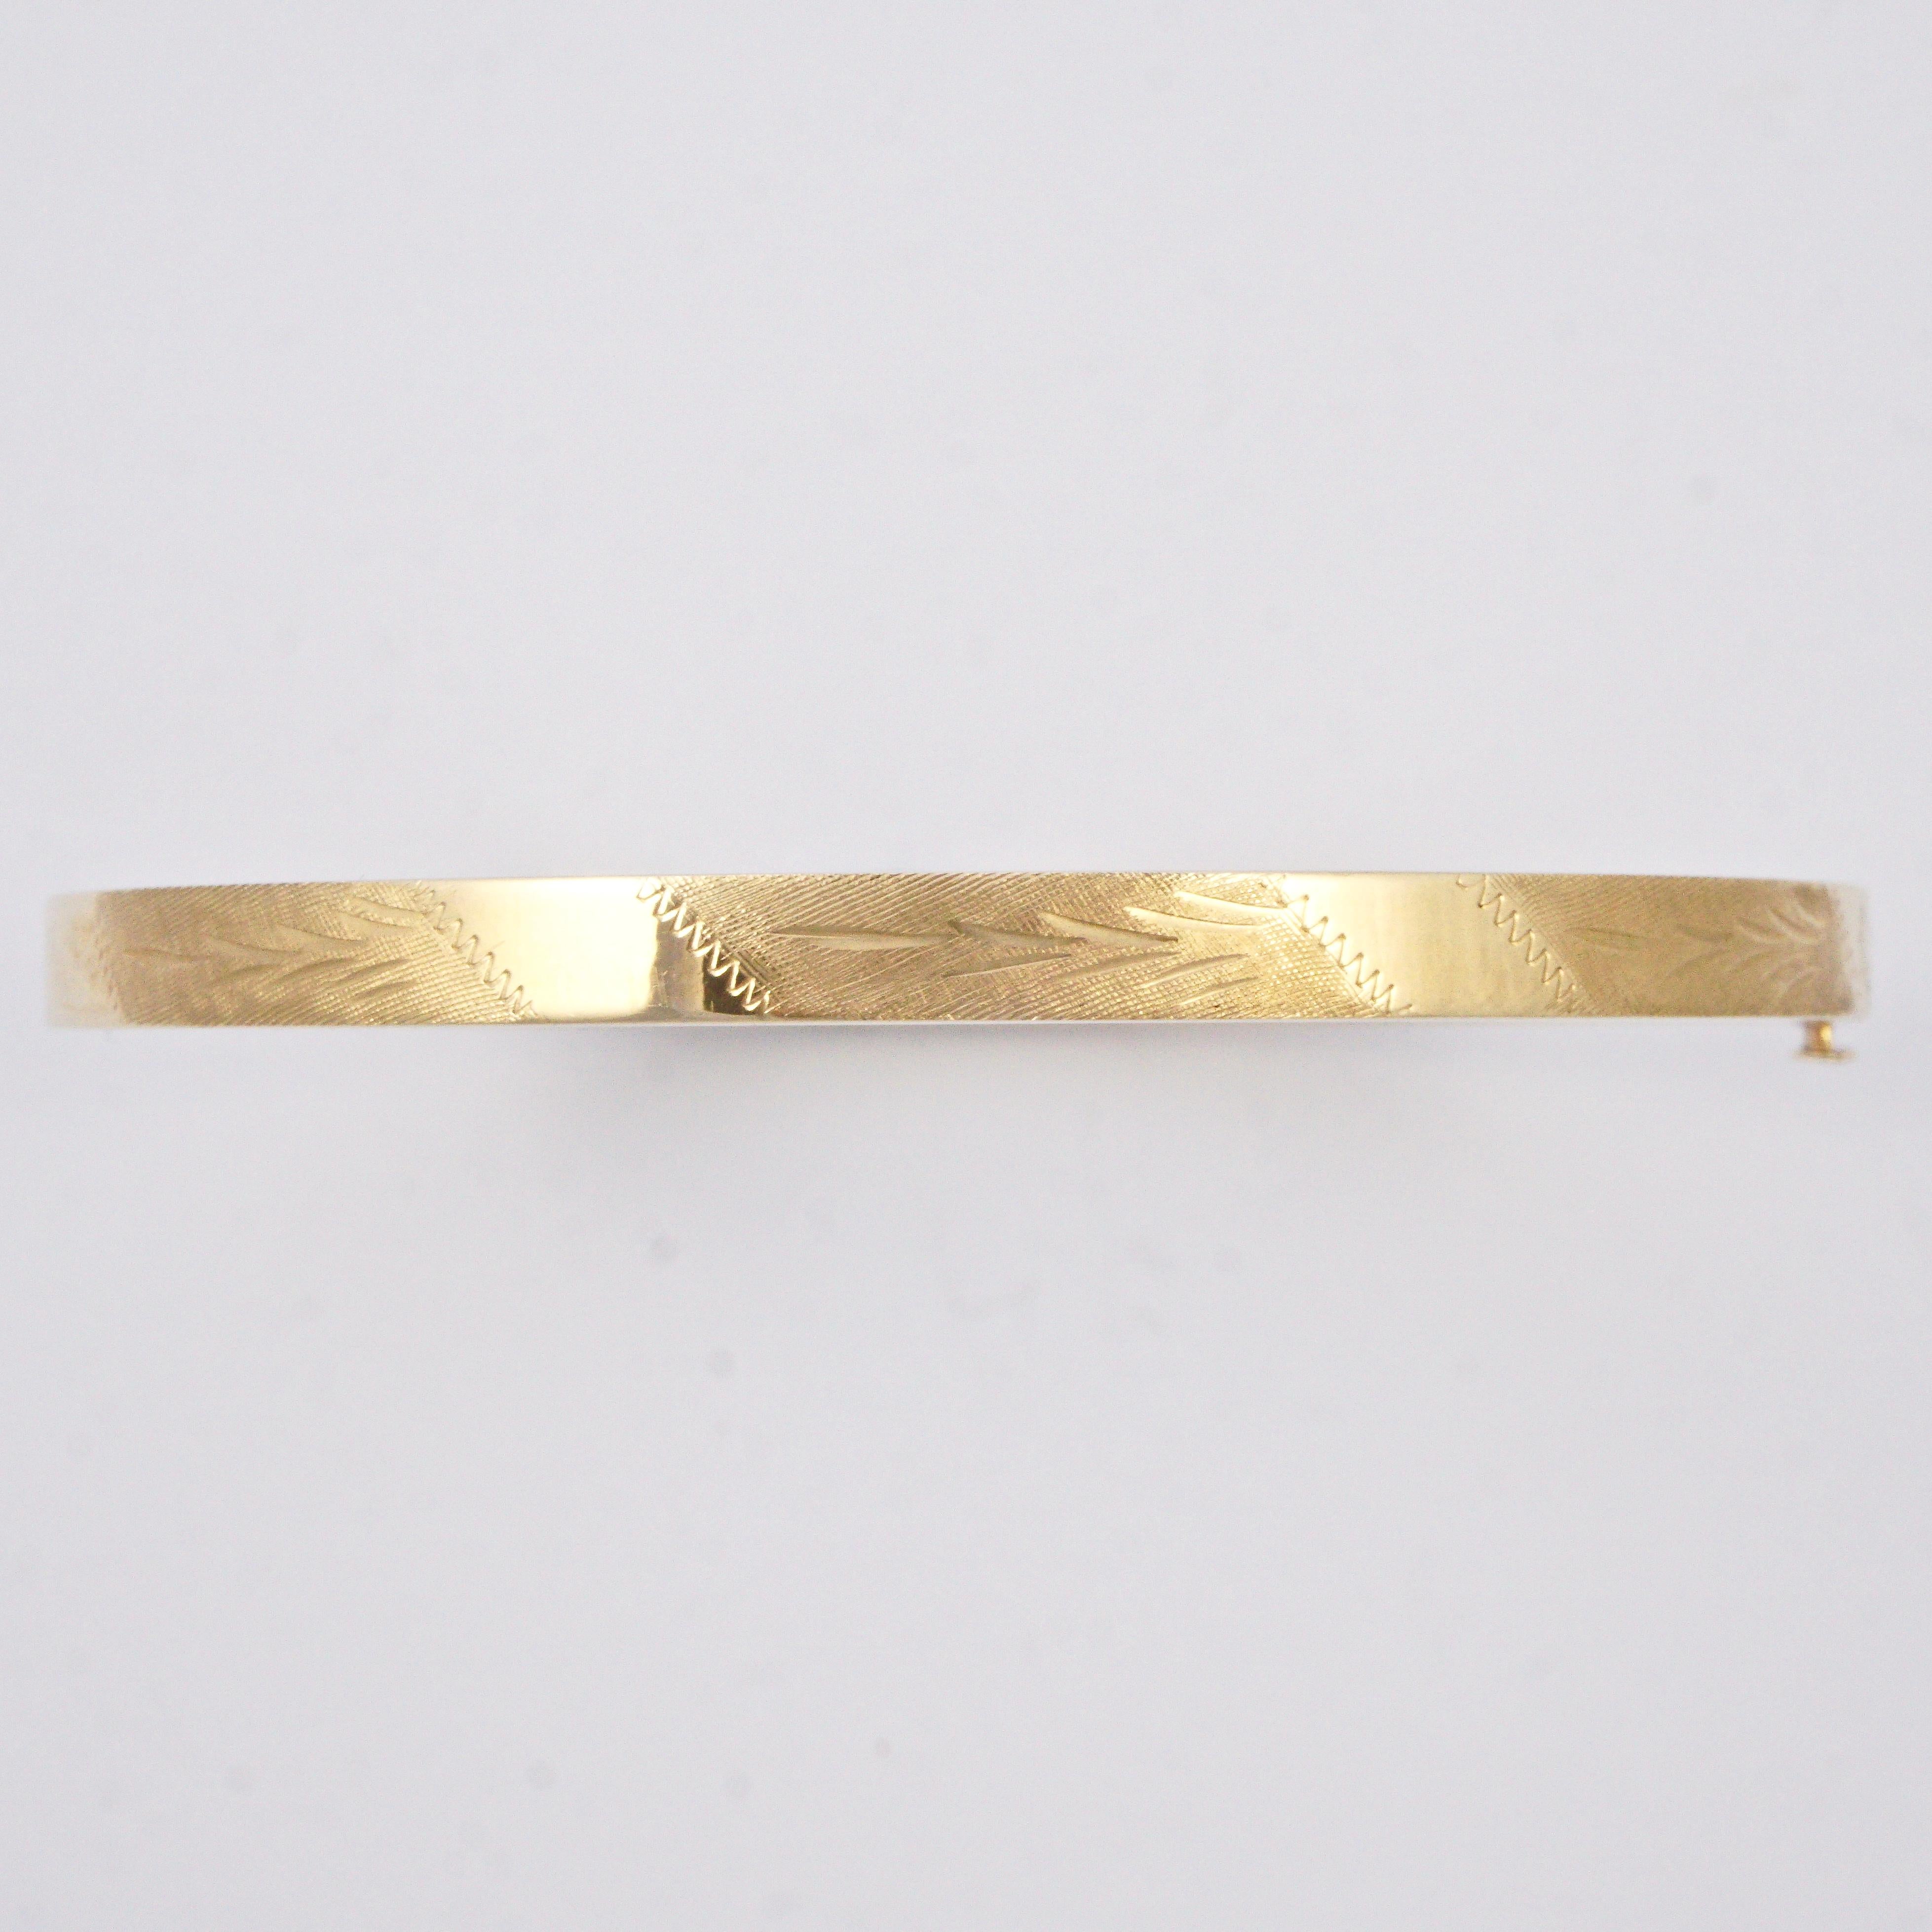 EternaGold 14K gold Costa Rica bangle, featuring a textured leaf design. The bangle is slightly oval measuring 6.4cm / 2.5 inches by 5.9cm / 2.3 inches diameter, the width is 4.5mm / .17 inch. It opens with a push button and has an internal bar for